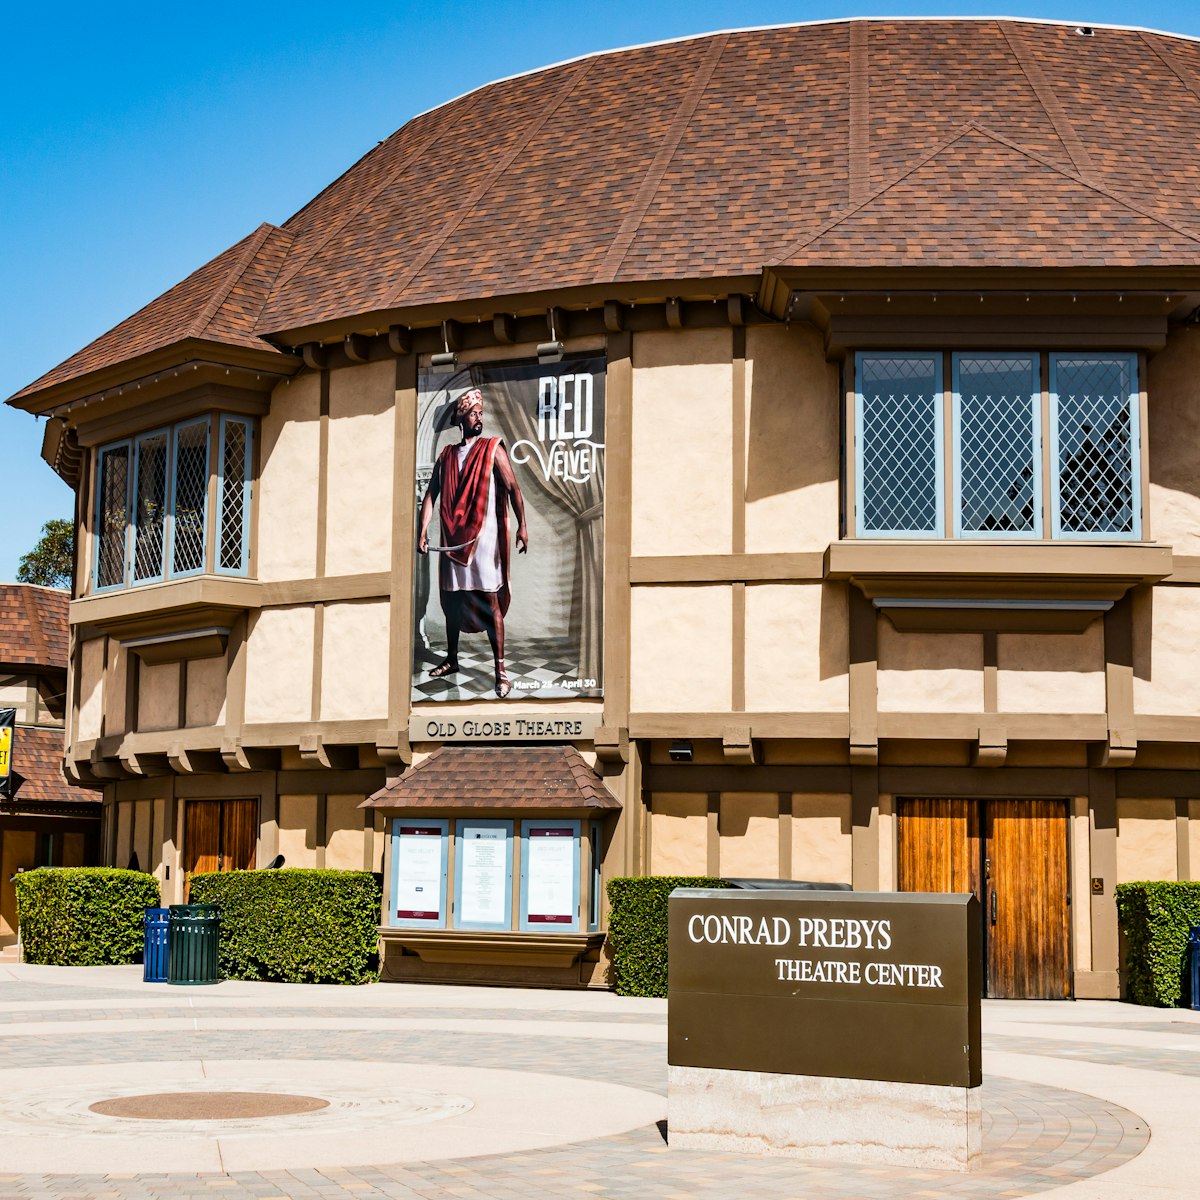 APRIL 28, 2017: Exterior of the Old Globe Theatre at the Simon Edison Centre for the Performing Arts in Balboa Park.
651906559
actor, architecture, arts, balboa, building, california, center, classical, company, destination, diego, edison, globe, landmark, musical, old, park, performance, performing, play, san, shakespeare, simon, theater, theatre, tourism, tourist